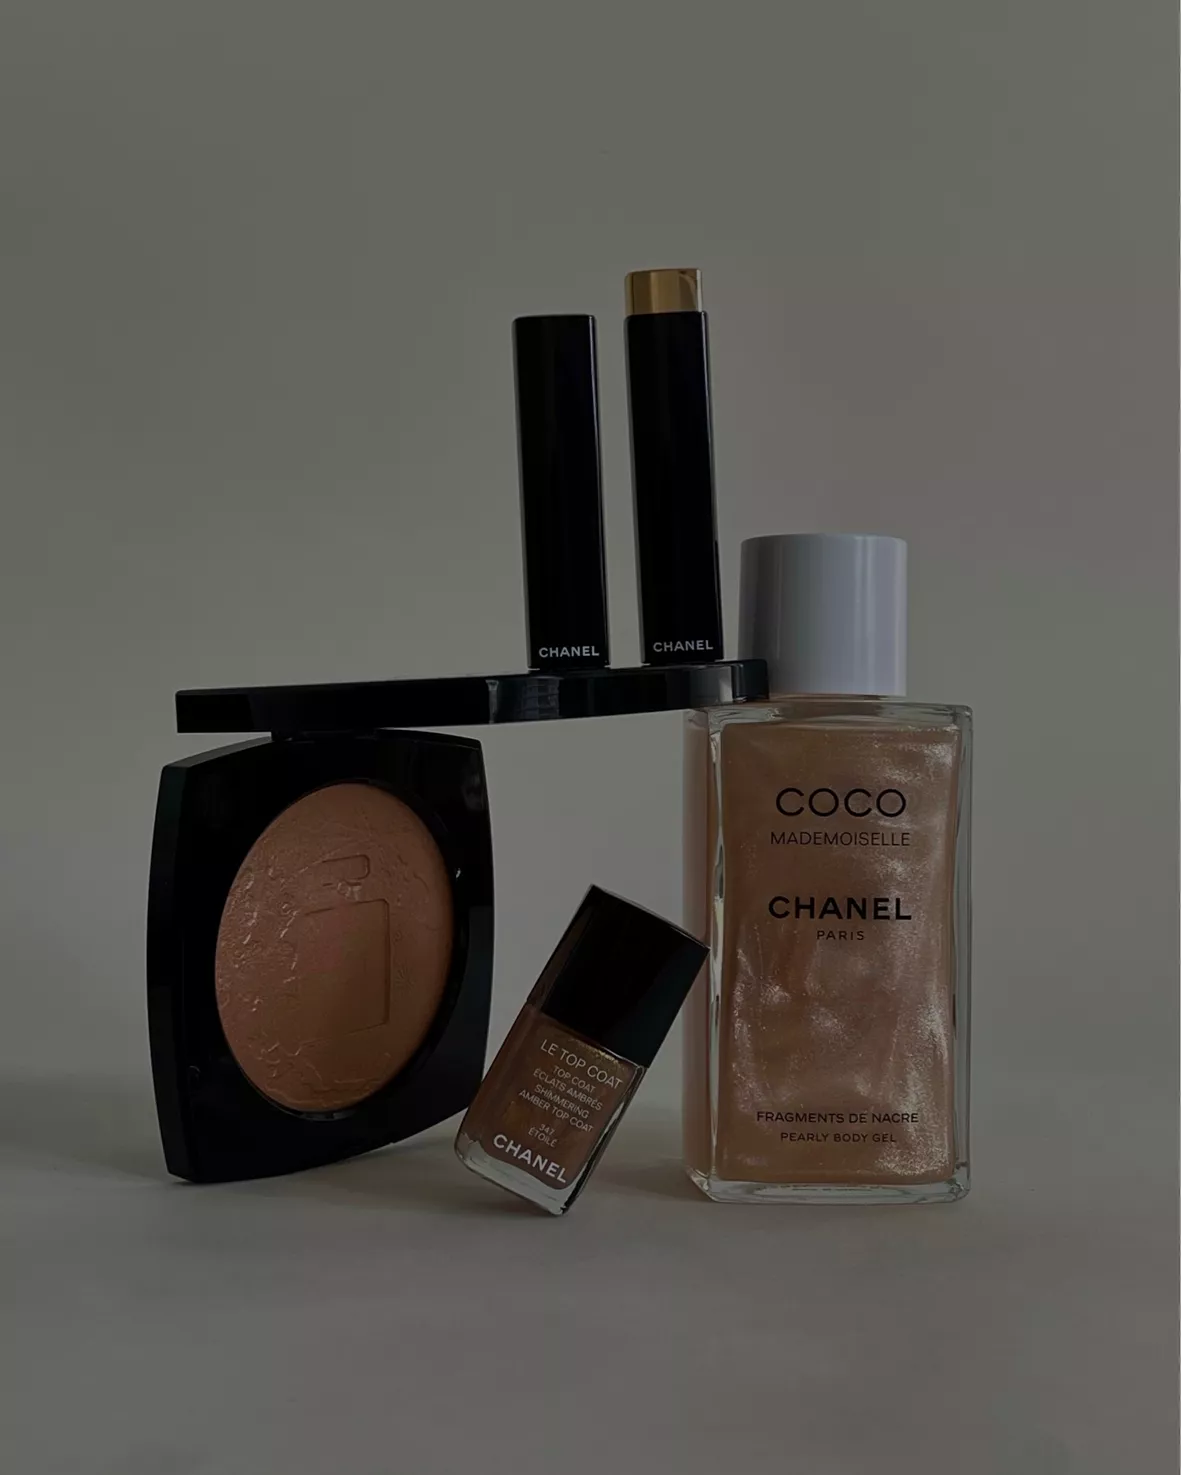 CHANEL - Coco Mademoiselle PEARLY BODY GEL - IRIDESCENT BODY GEL